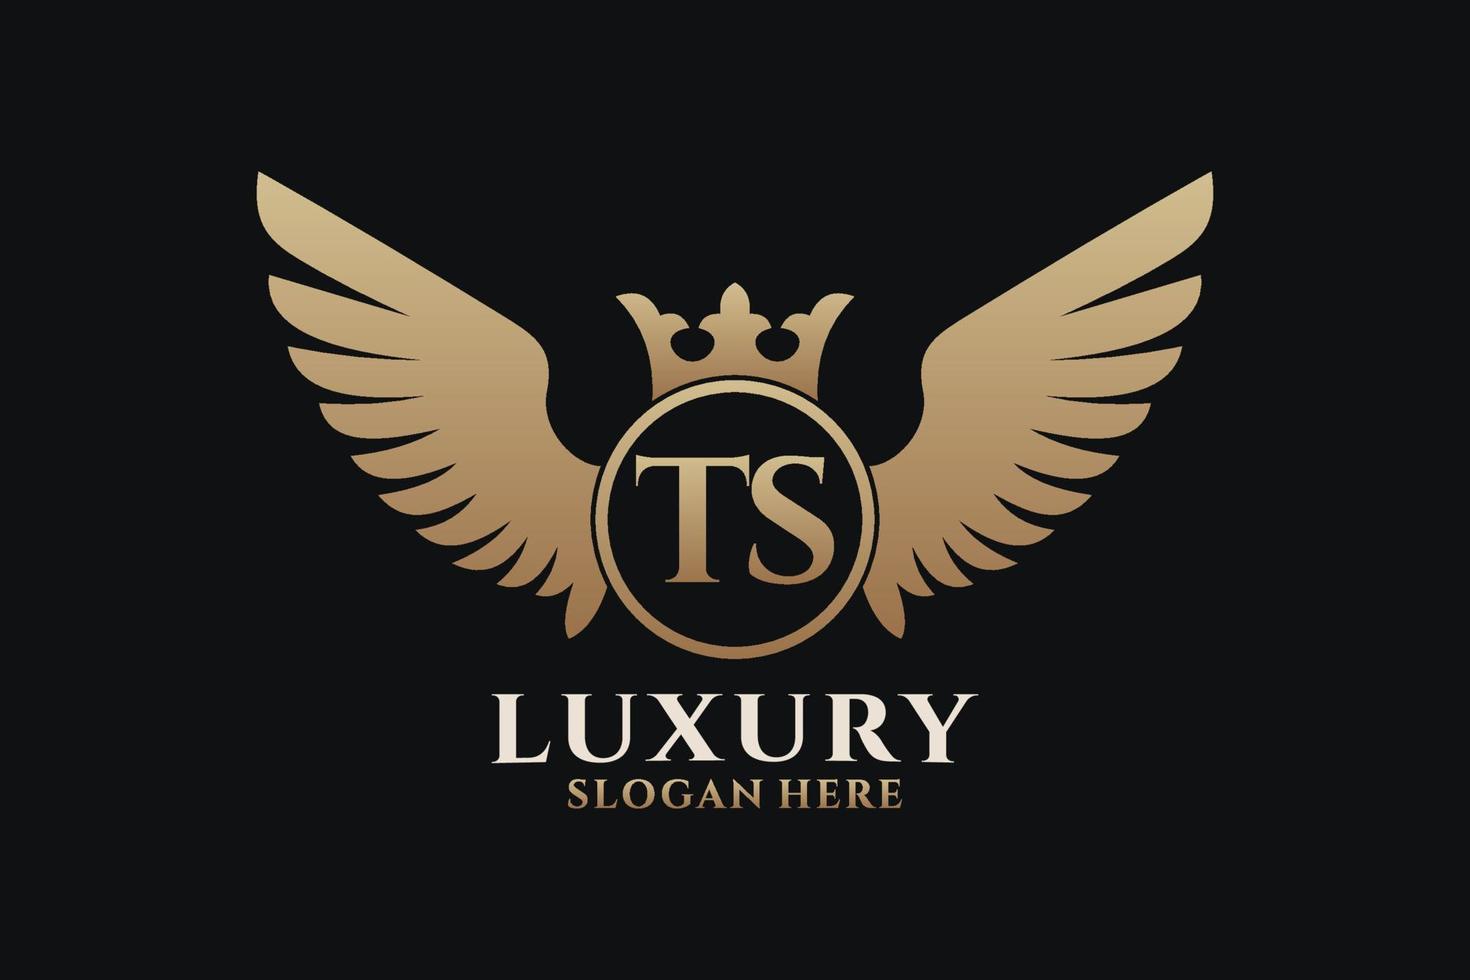 Luxury royal wing Letter TS crest Gold color Logo vector, Victory logo, crest logo, wing logo, vector logo template.